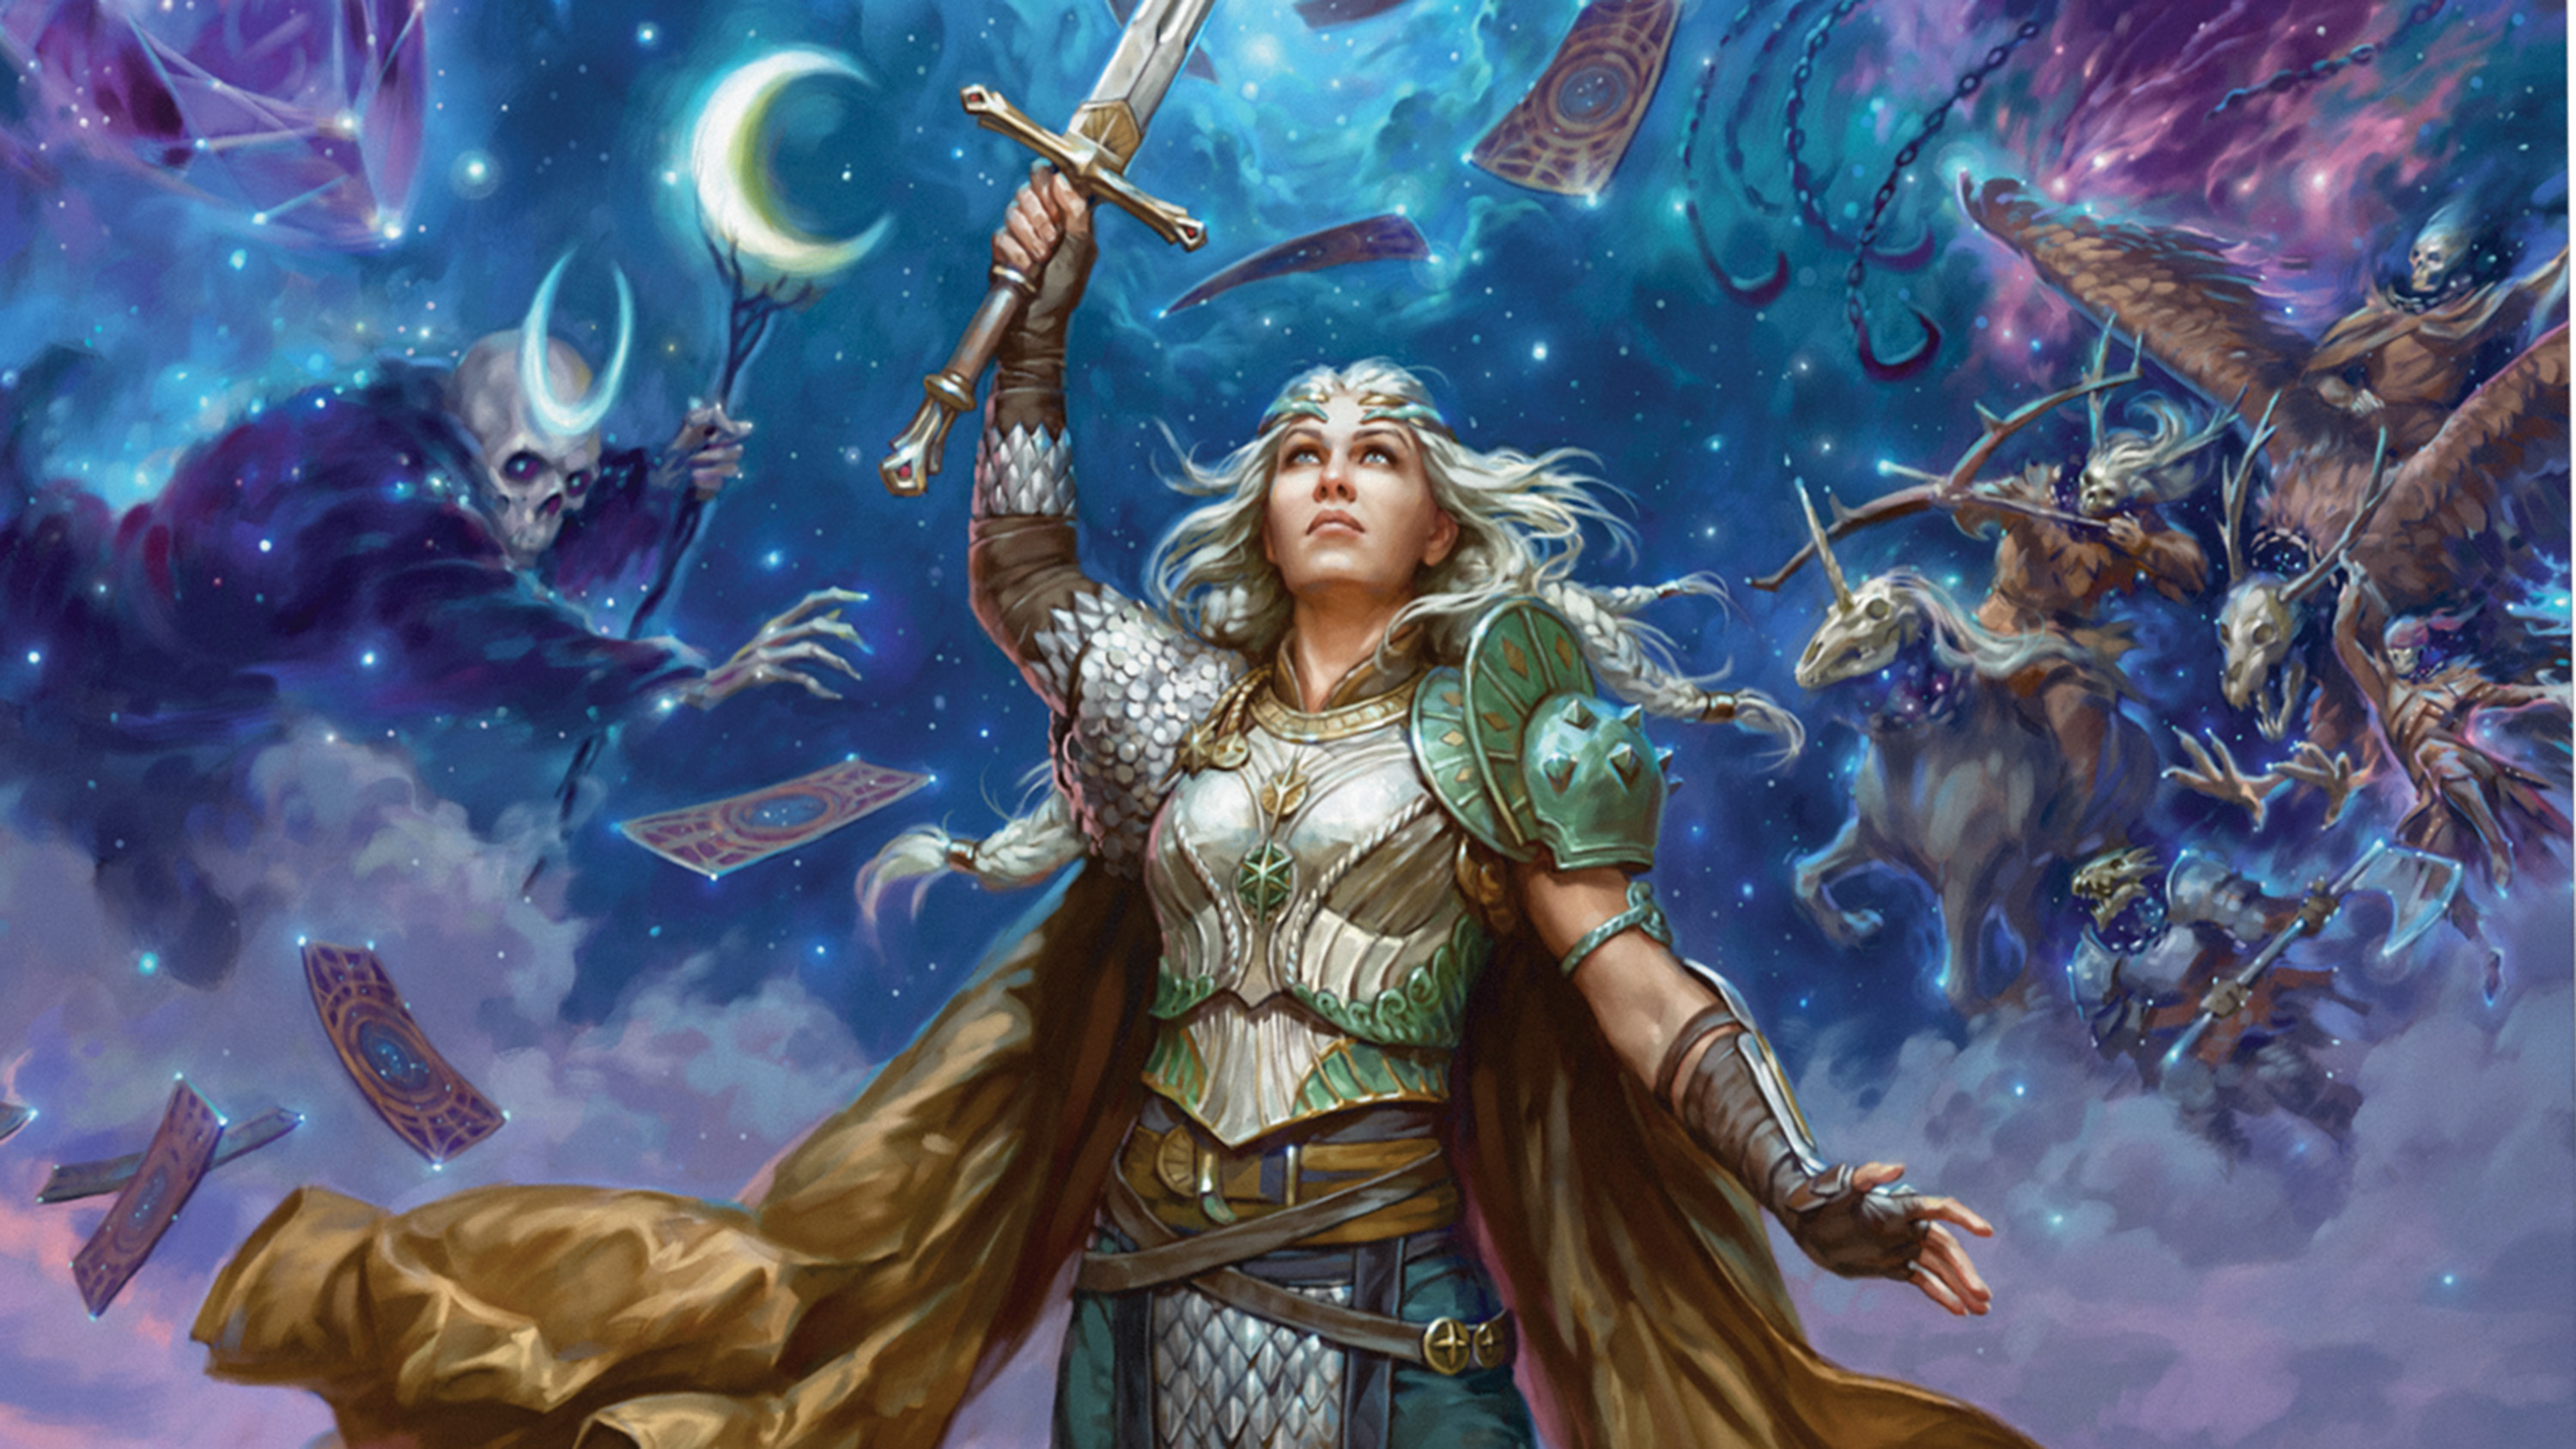 Cover art for The Book of Many Things, which comes bundled inside The Deck of Many Things — a boxed set of cards from Wizards of the Coast, made for Dungeons &amp; Dragons. It shows a female-presenting person in metal armor holding a sword aloft. The heavens open around them, with spectral horses and demonic entities reaching toward their sword.